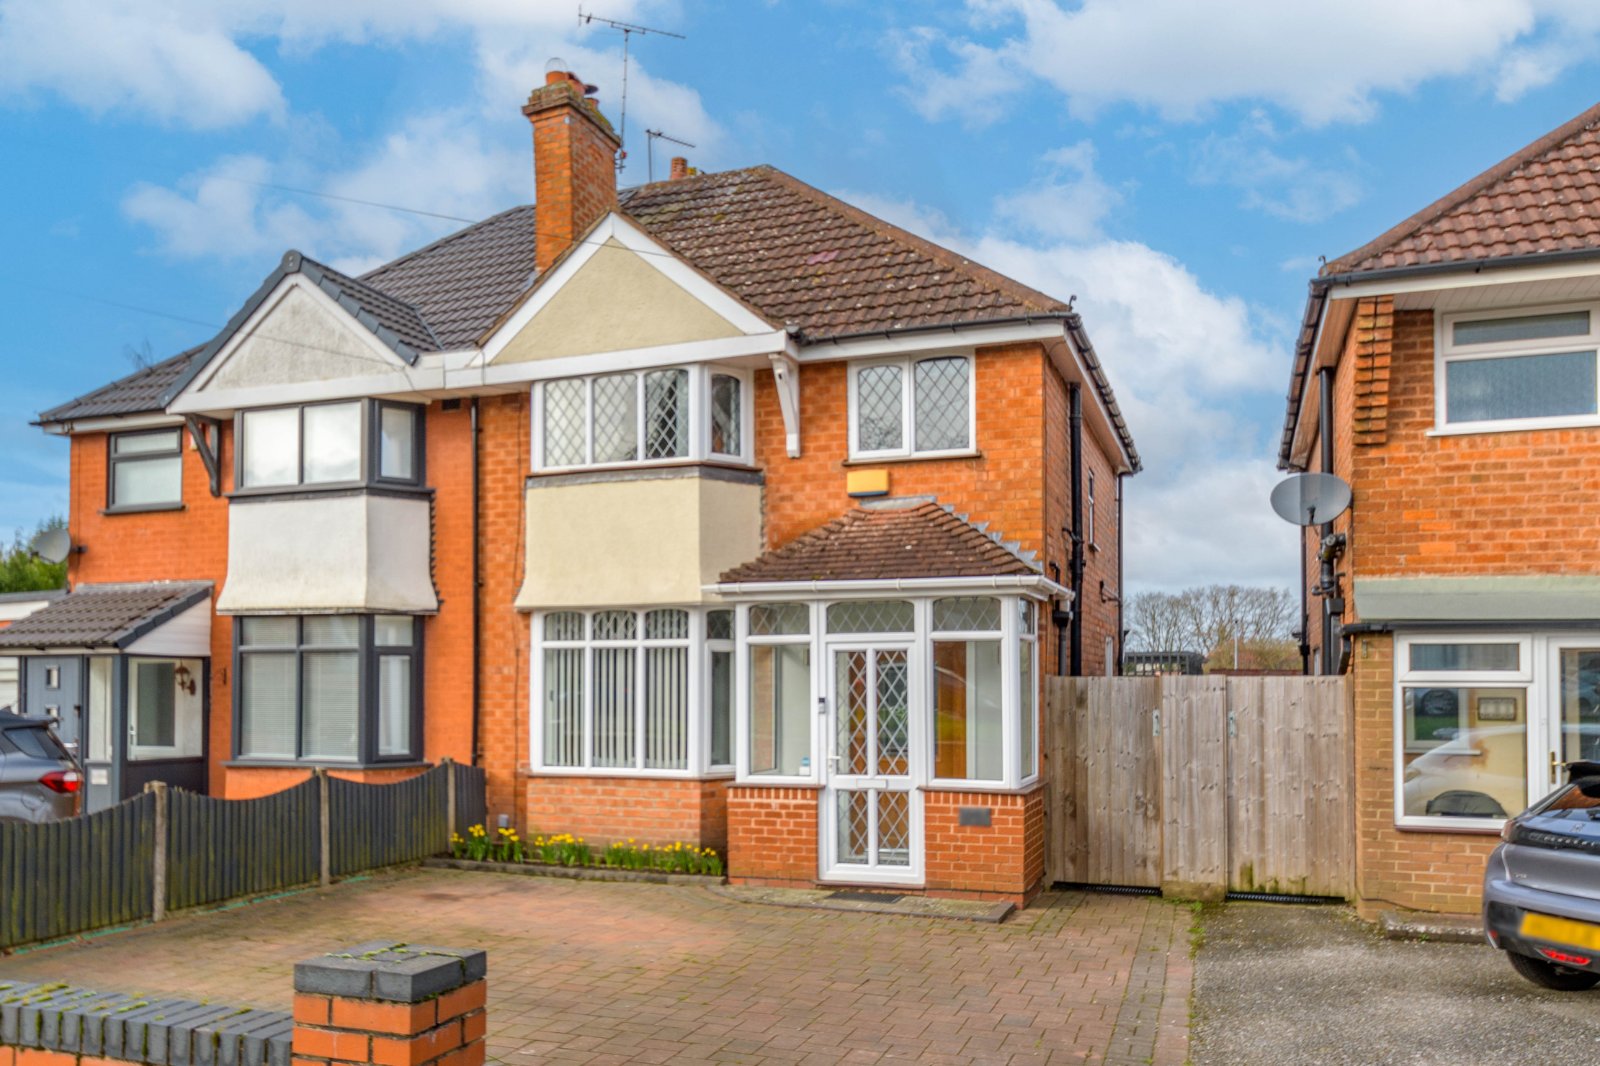 3 bed house for sale in Groveley Lane, Birmingham - Property Image 1